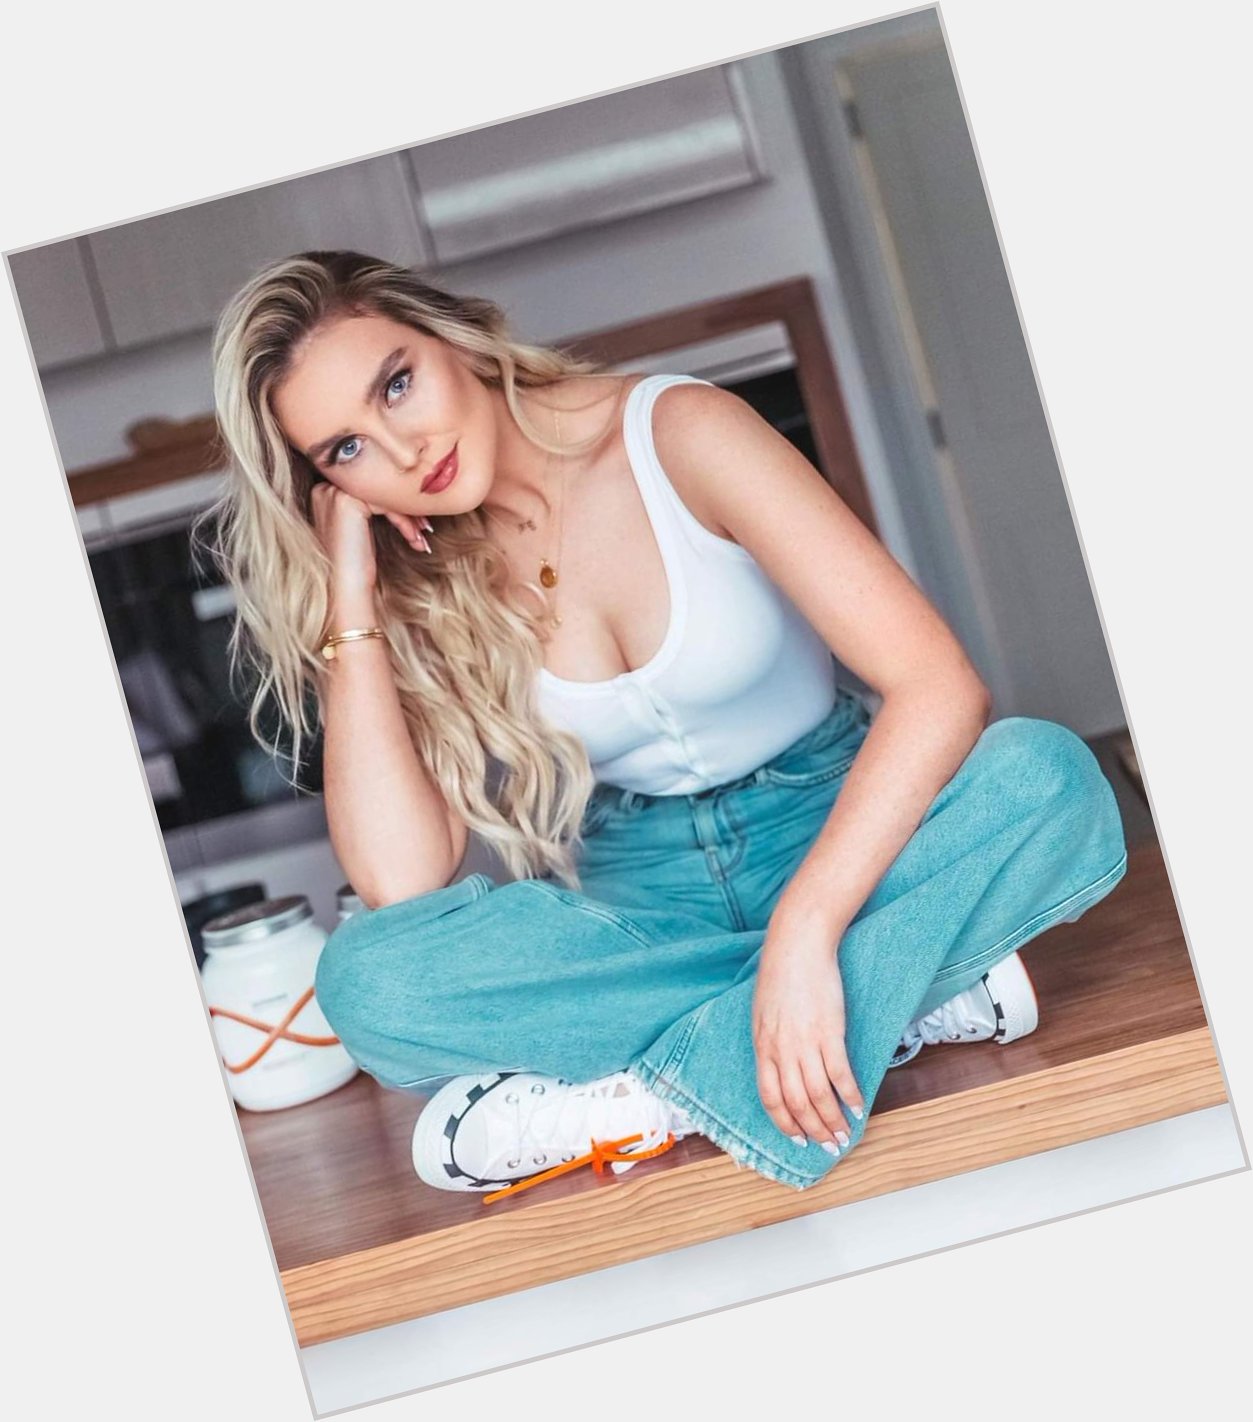 Happy Birthday, Perrie Edwards of 